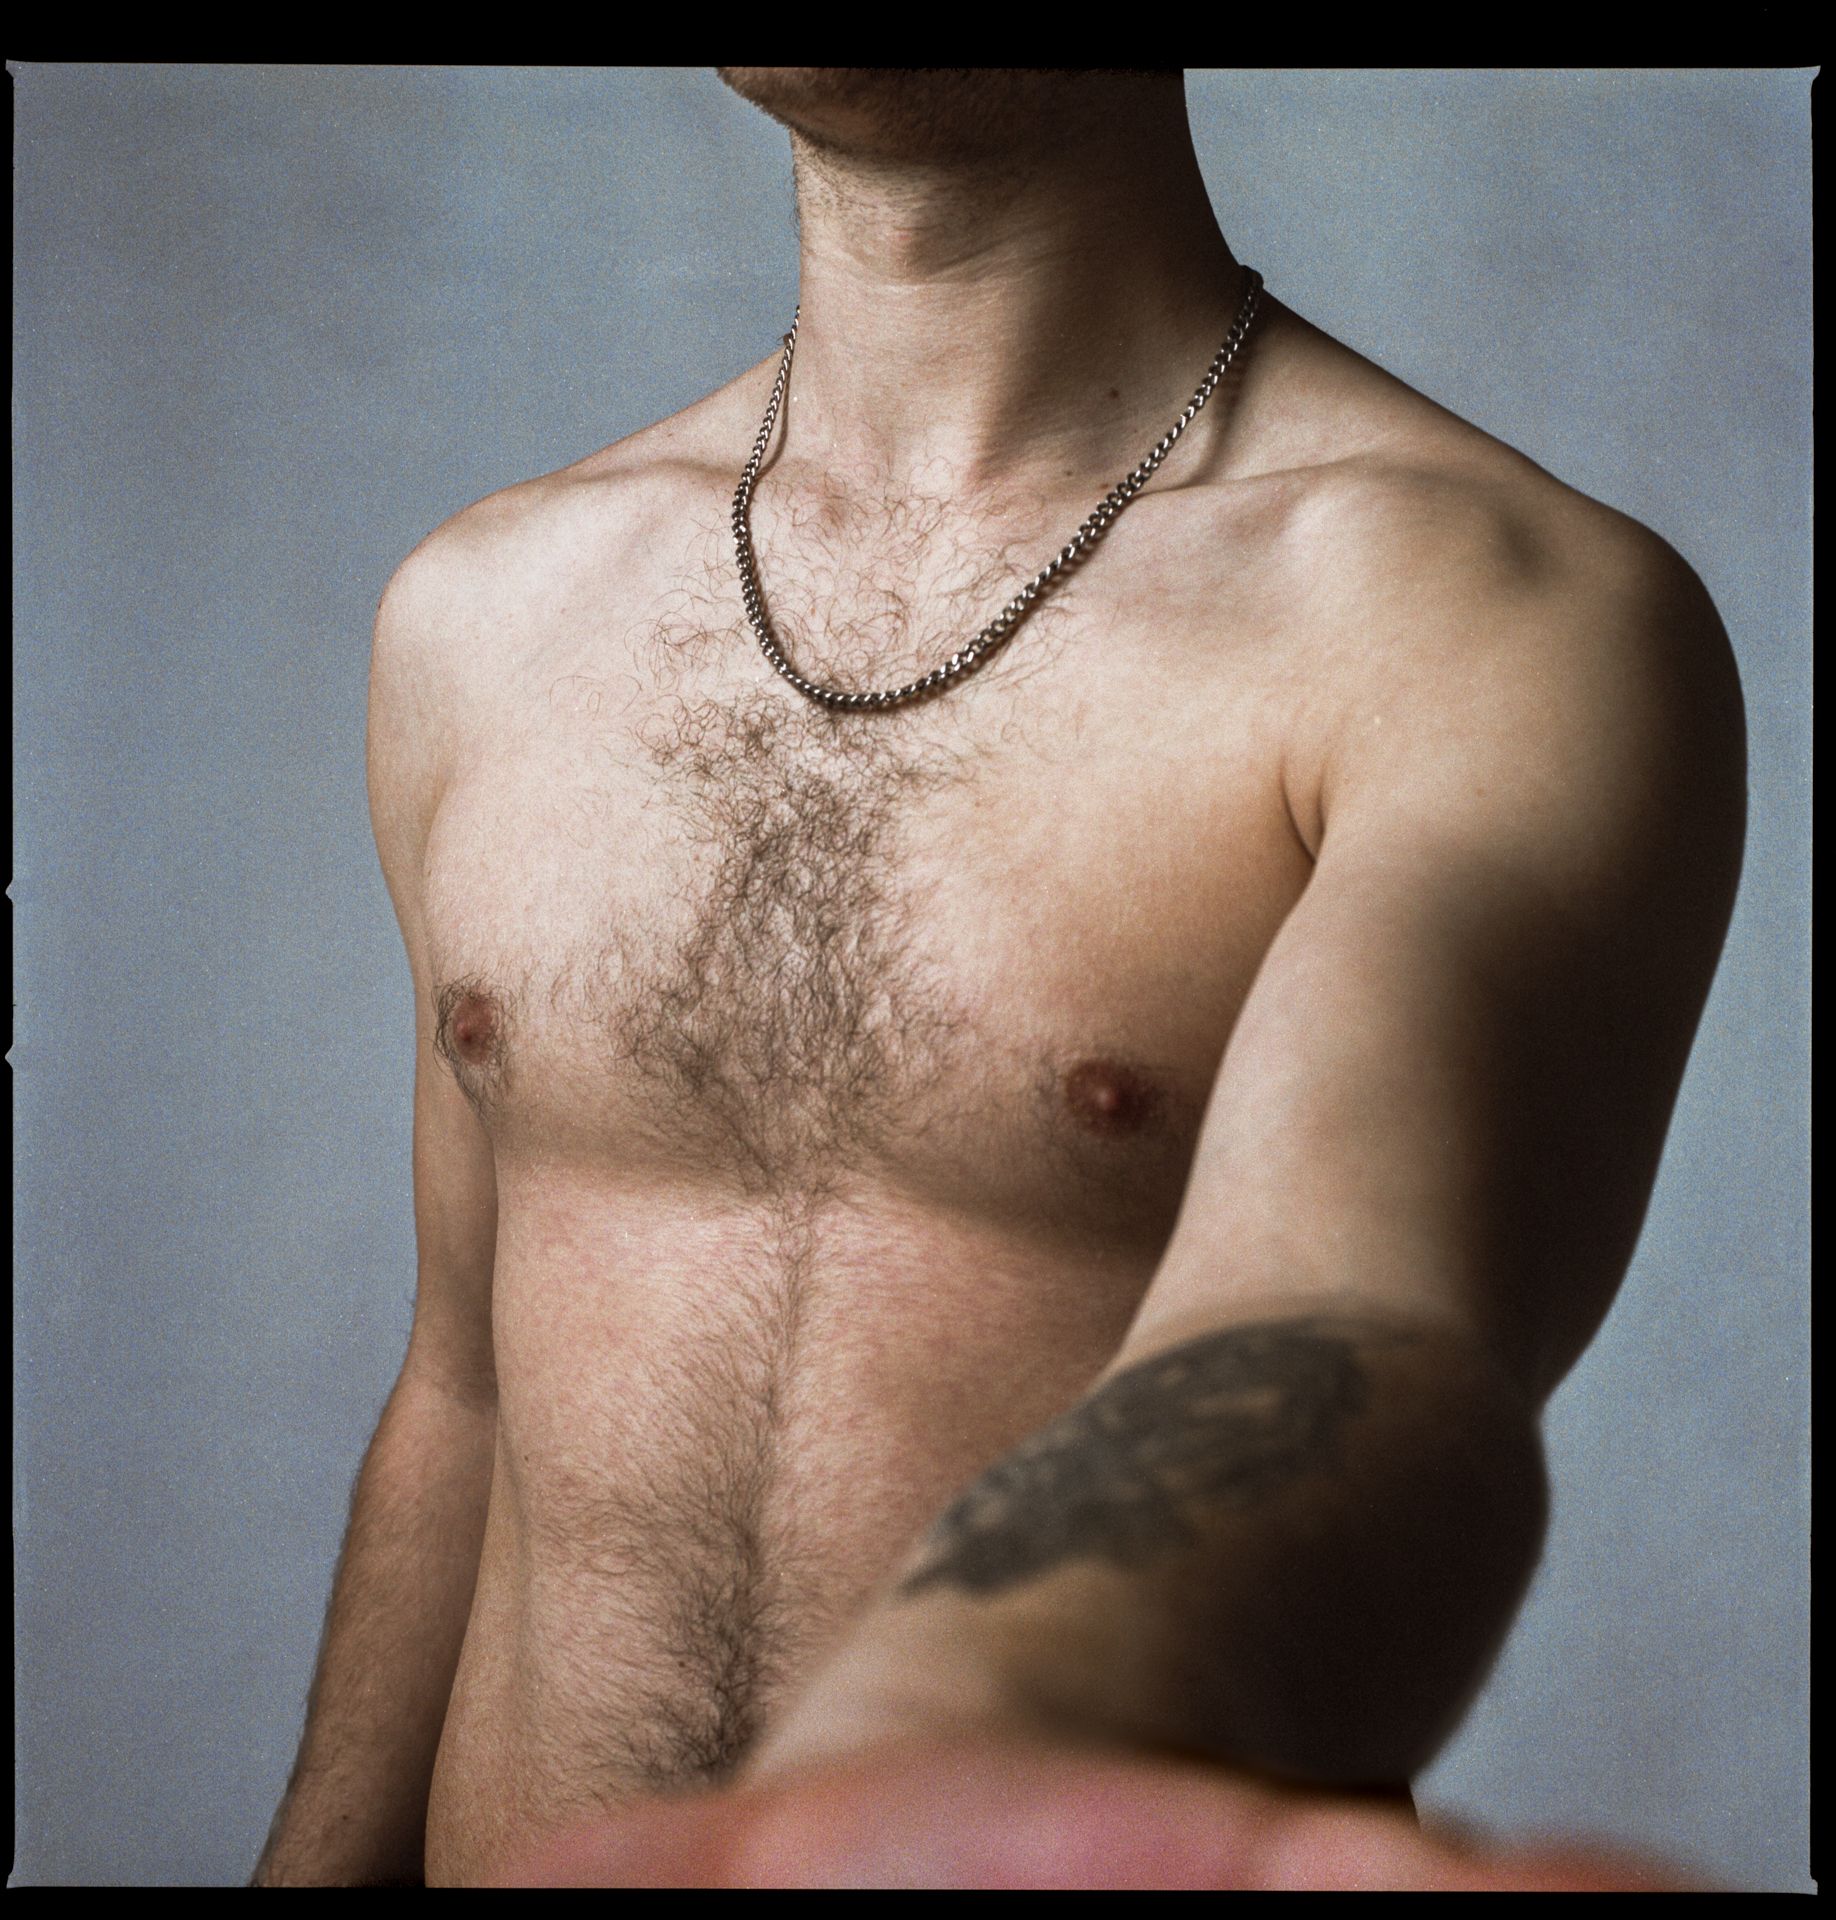 The image depicts a shirtless caucasian man with tattoos, grasping out to the camera as the figure (face not shown) confronts the lens.